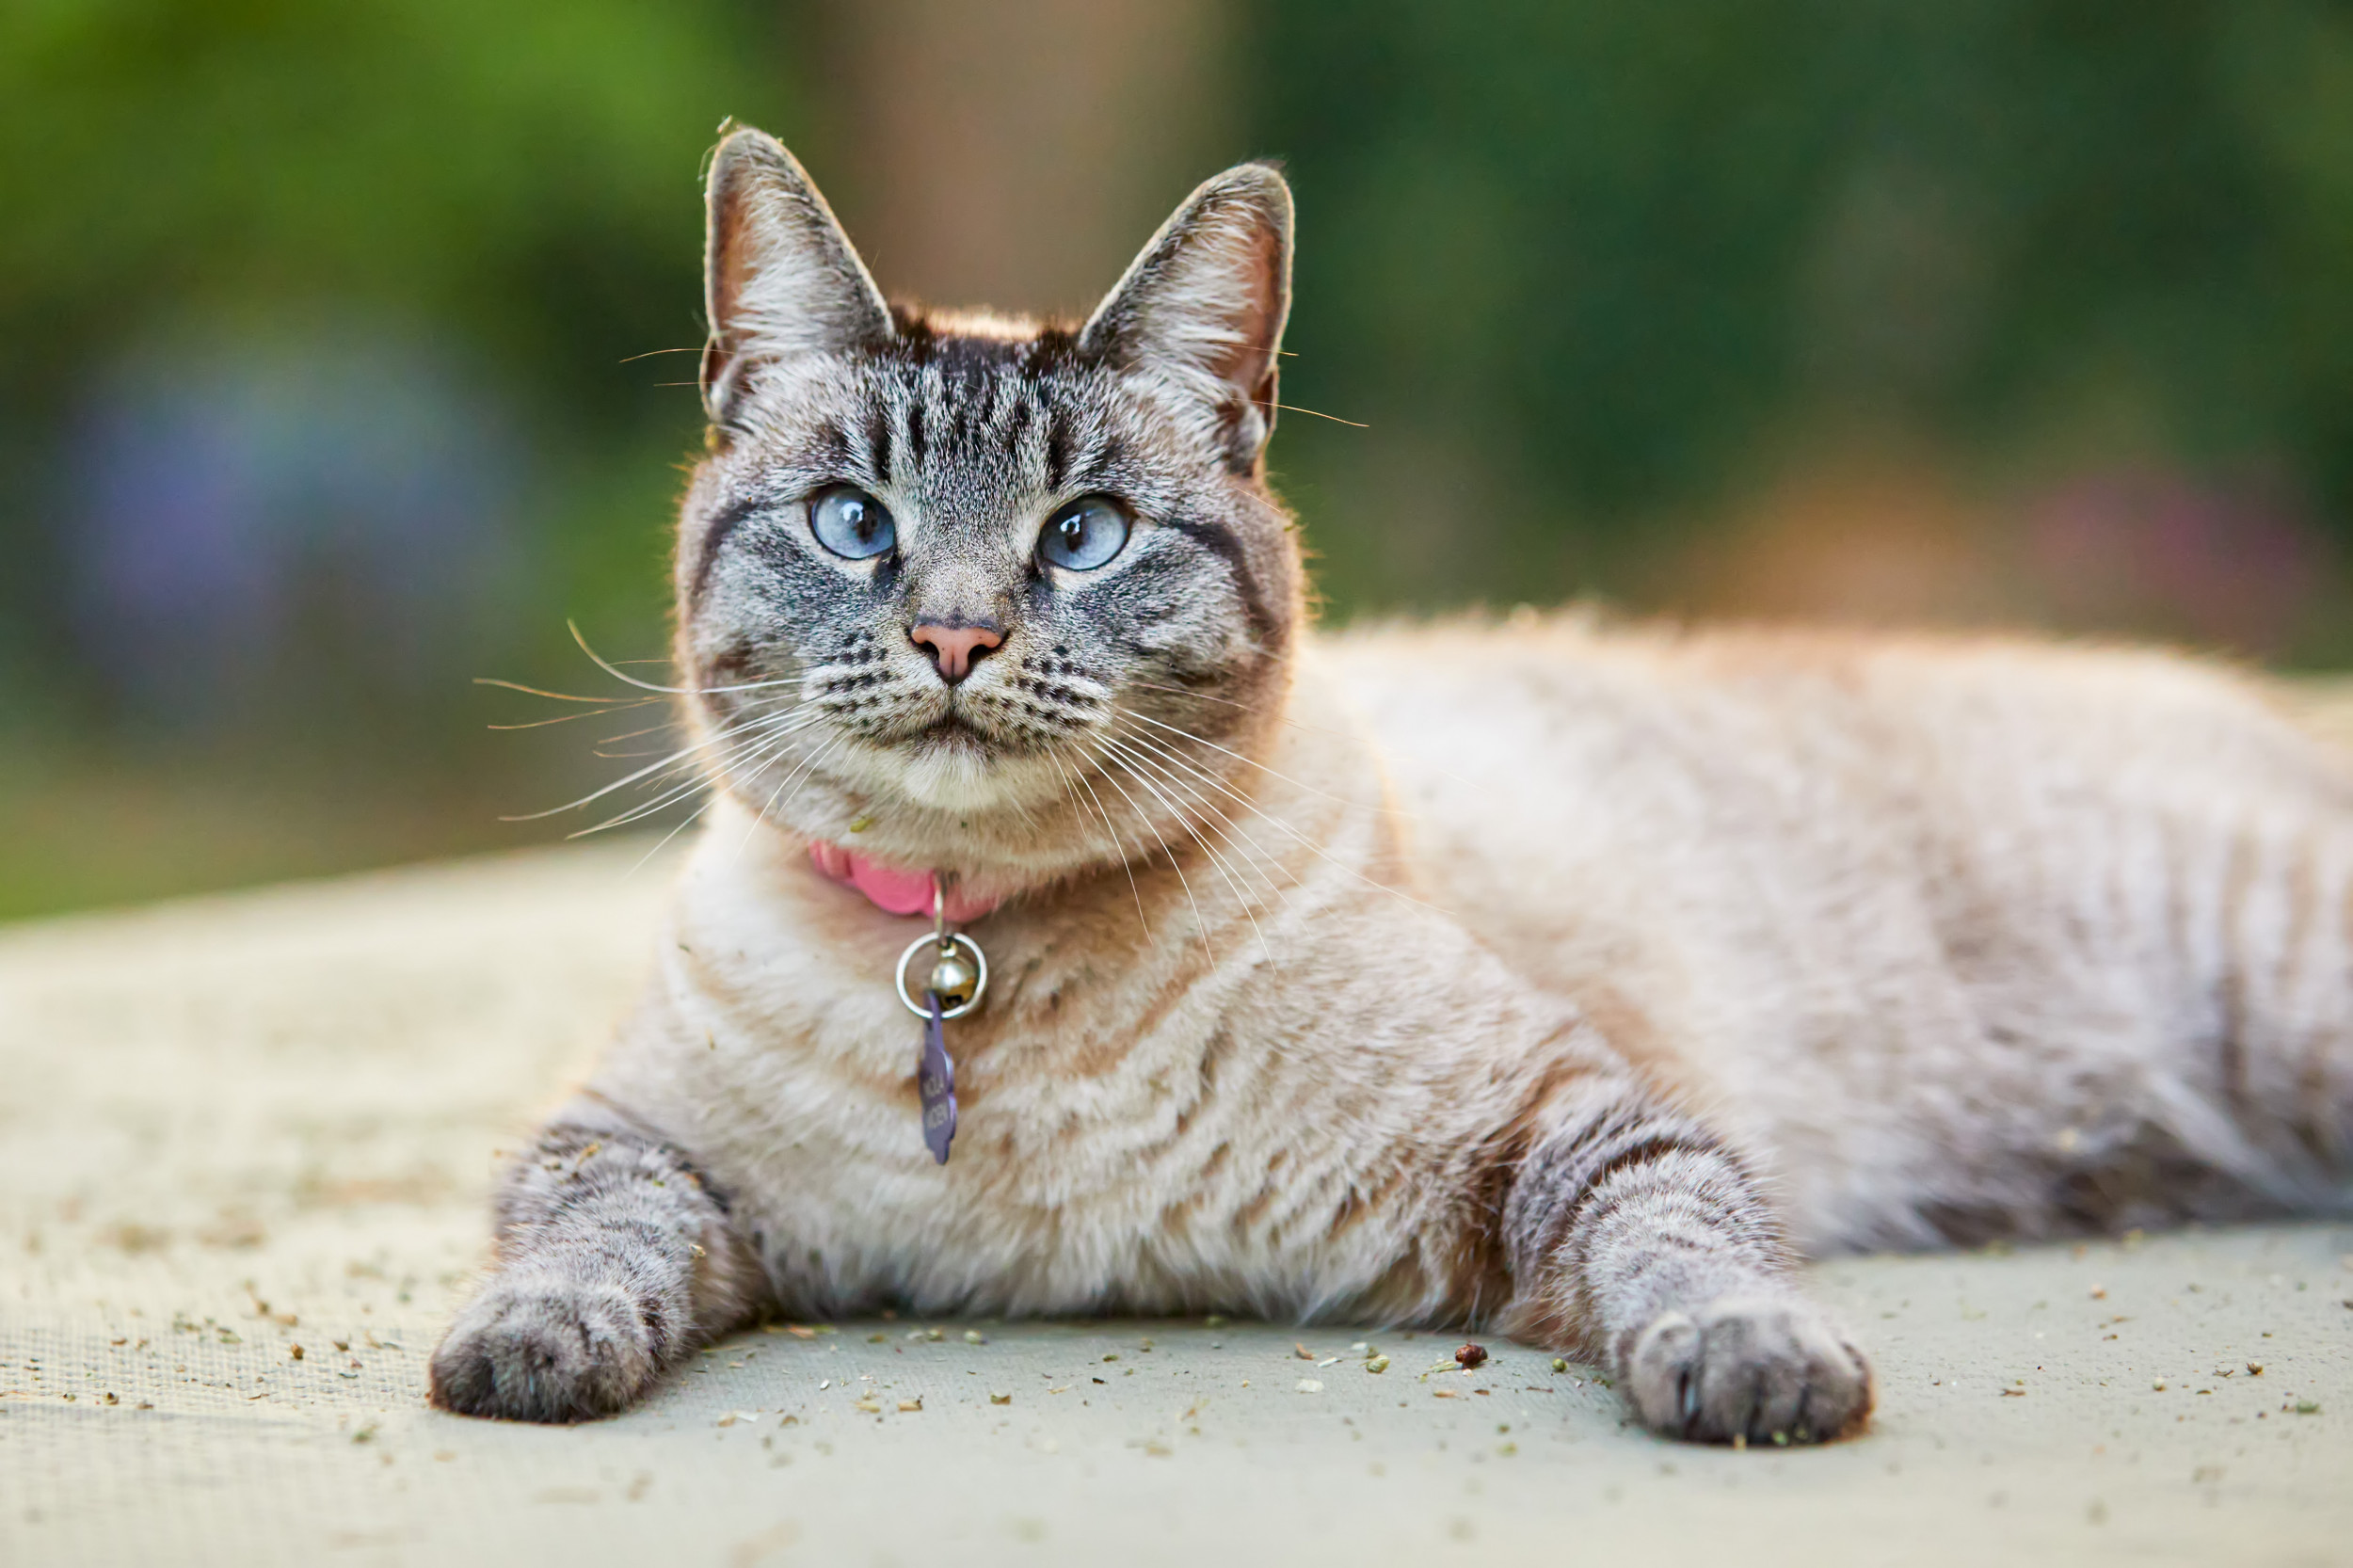 Do Cats Have Facial Expressions? Cats May Not Have a Poker Face